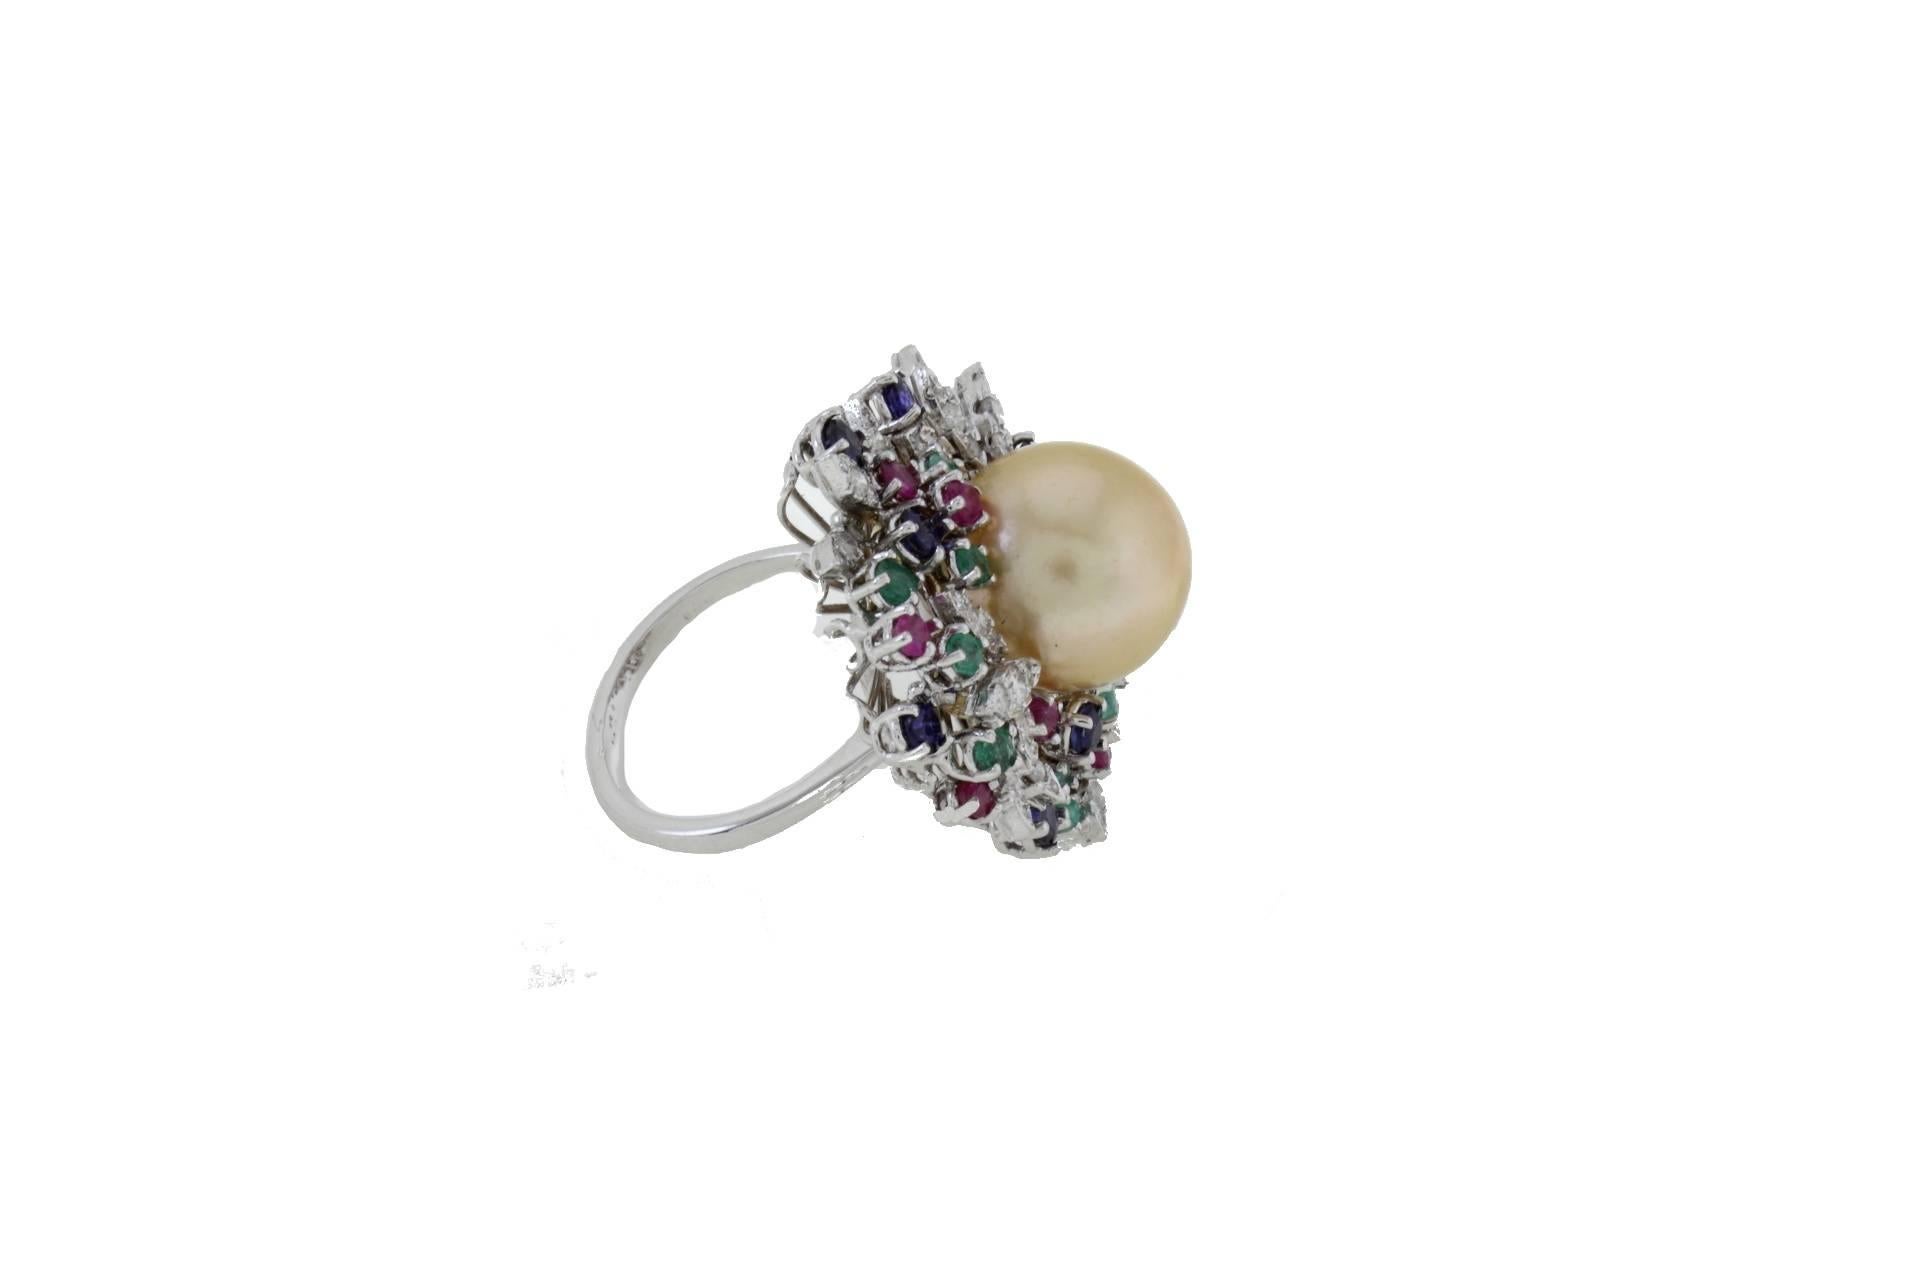 Cluster ring in 14k white gold mounted with one yellow south sea pearl in the center and diamonds, emeralds, rubies, blue sapphires all around it.
Diamonds 1.55 ct
Emeralds, Rubies, Blue Sapphires 3.38 ct
Pearl 3.60 gr/ 13.50 mm
Total Weight 14.50